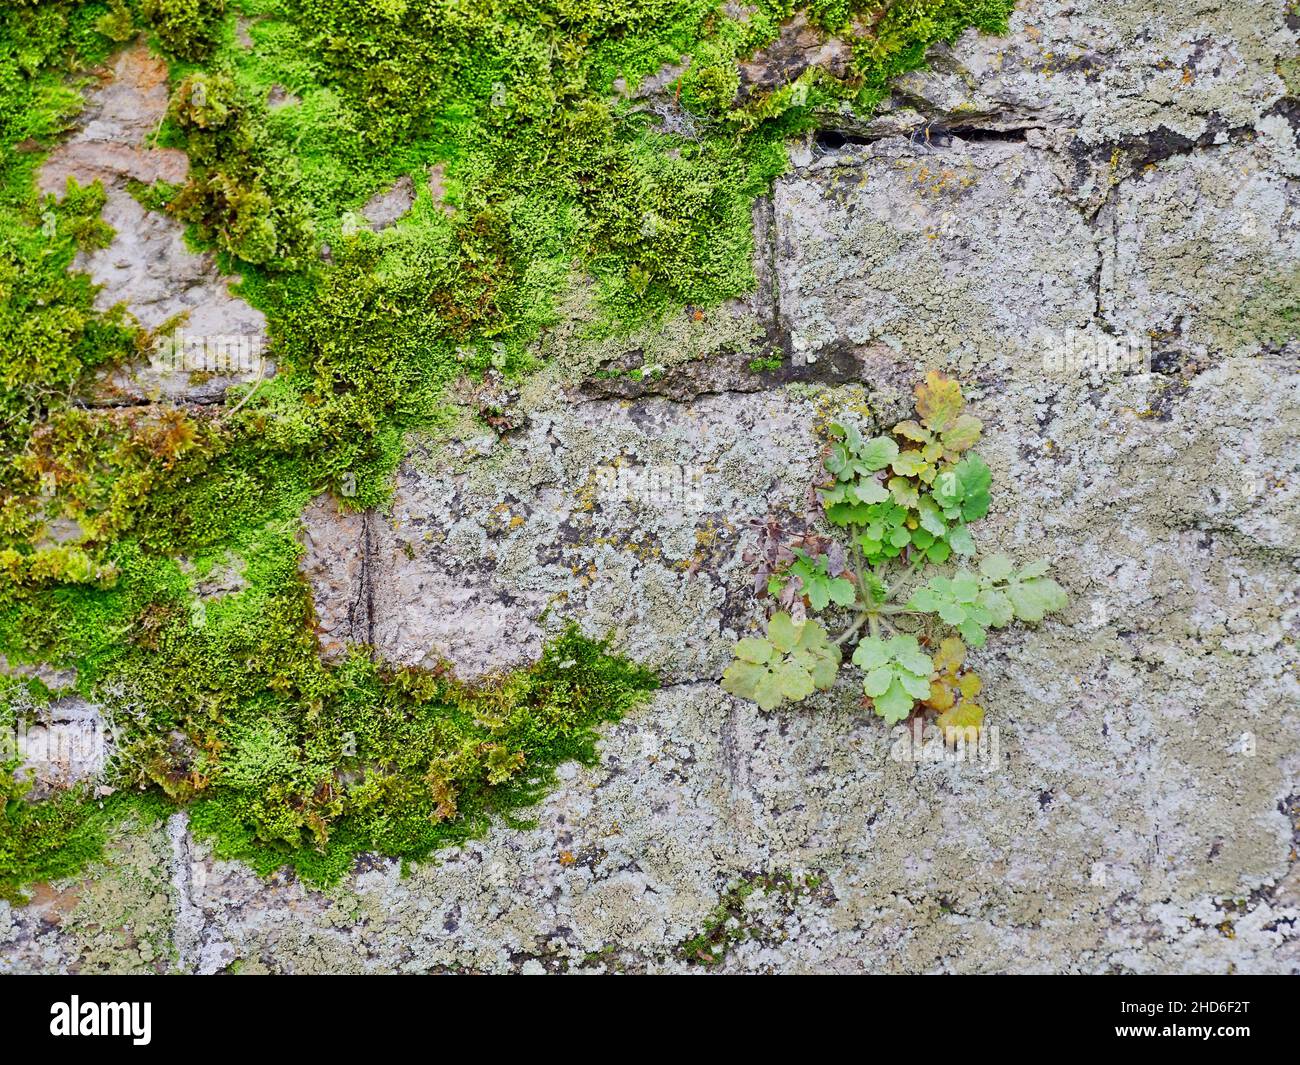 Masonry overgrown with lichen, moss and small plants Stock Photo